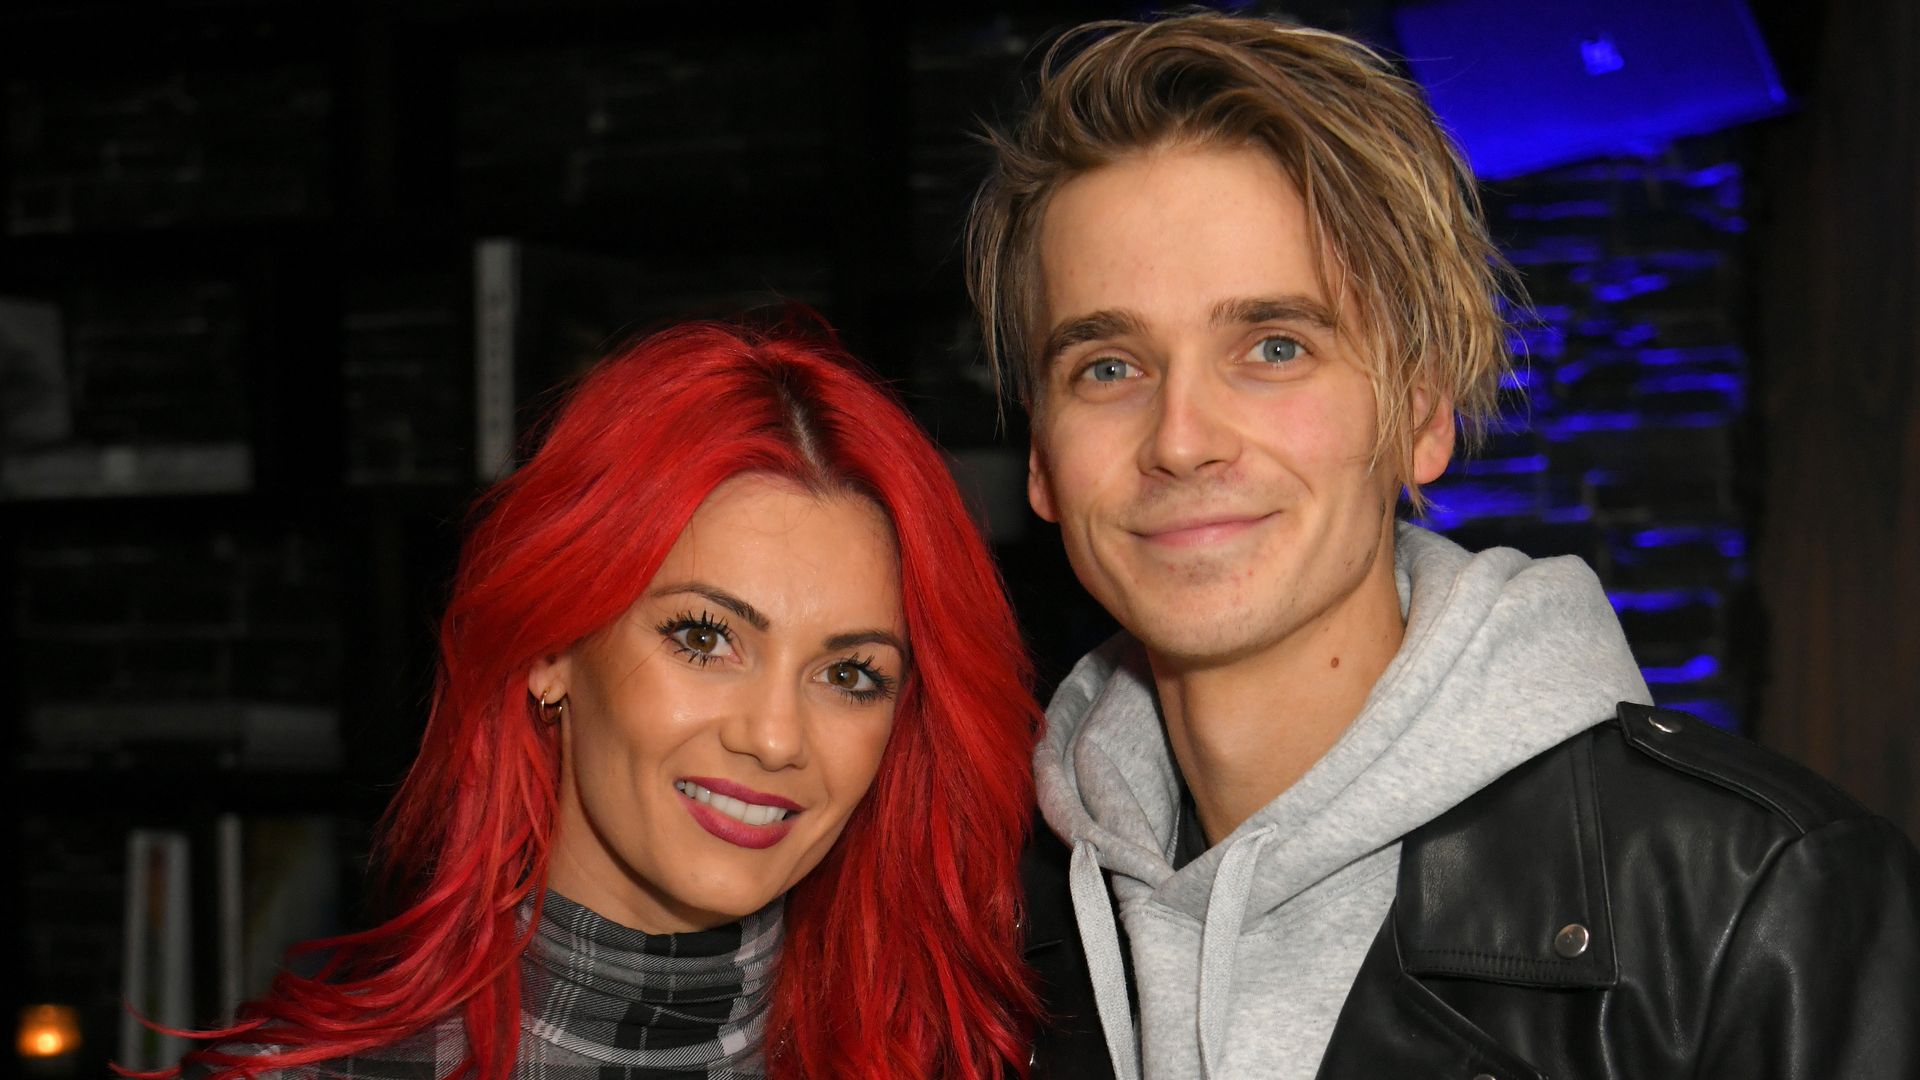 Dianne Buswell and Joe Sugg holding glasses